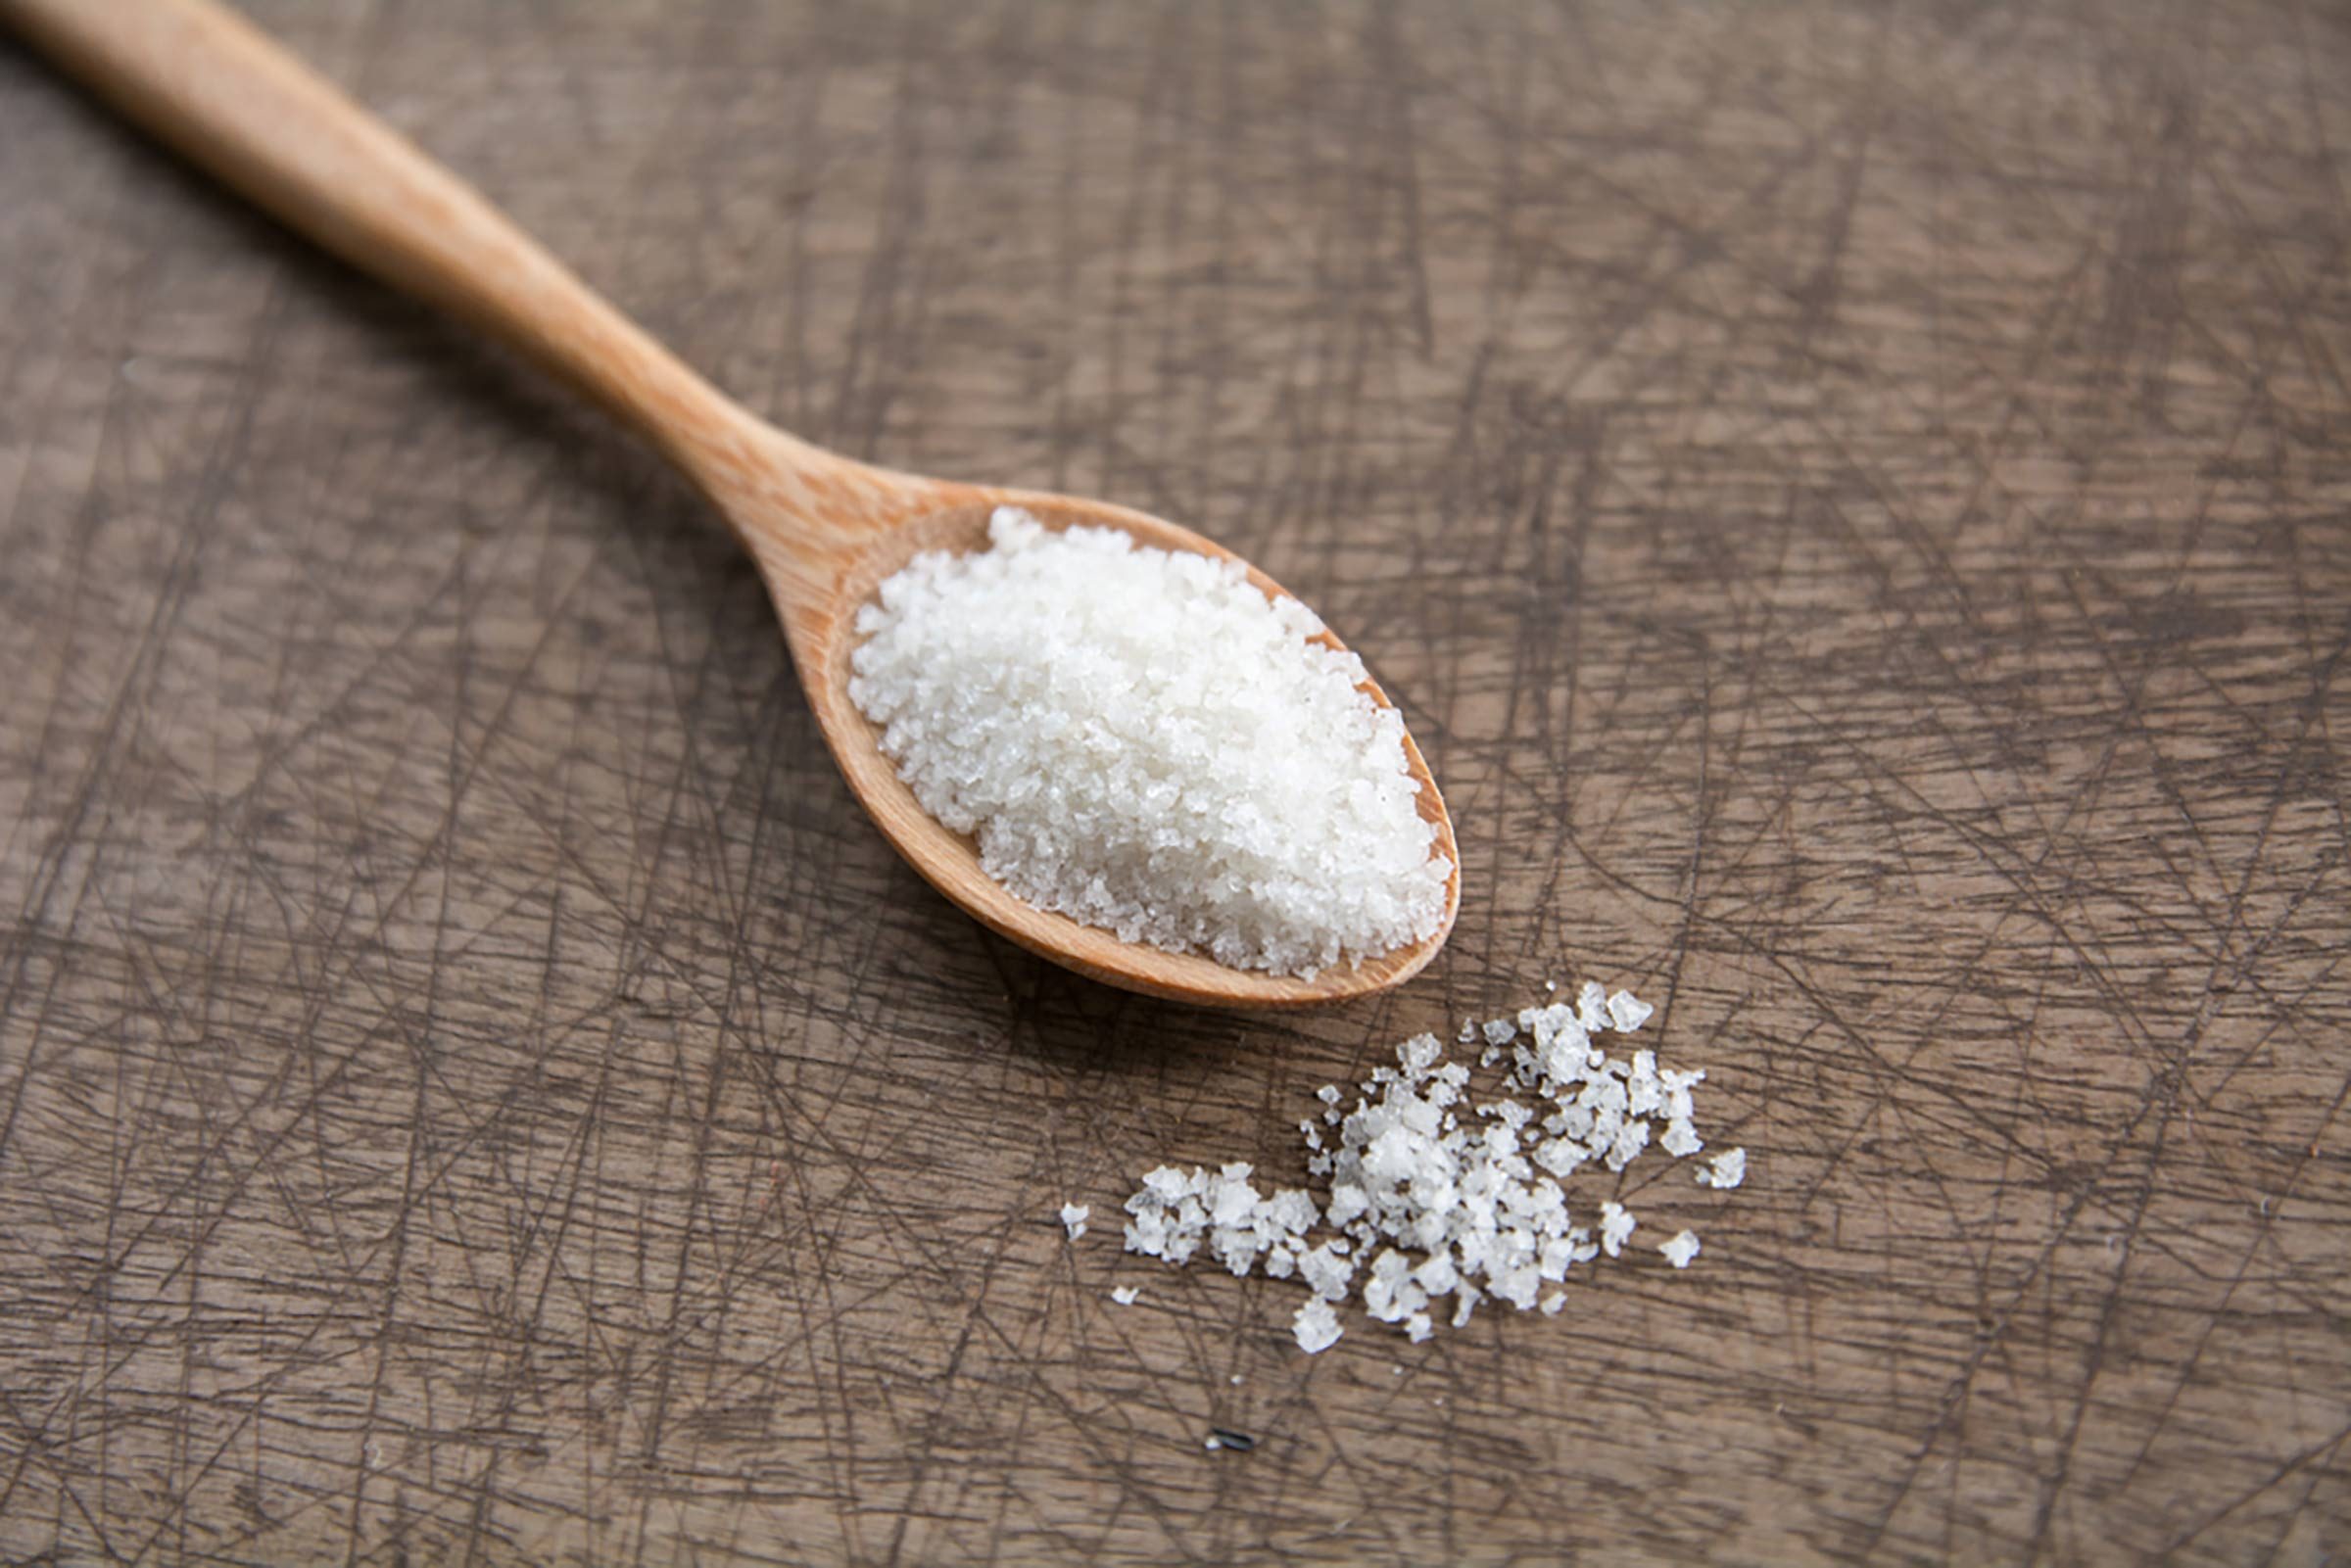 Iodized Salt Is No Longer a Required Part of a Healthy Diet—Here’s Why